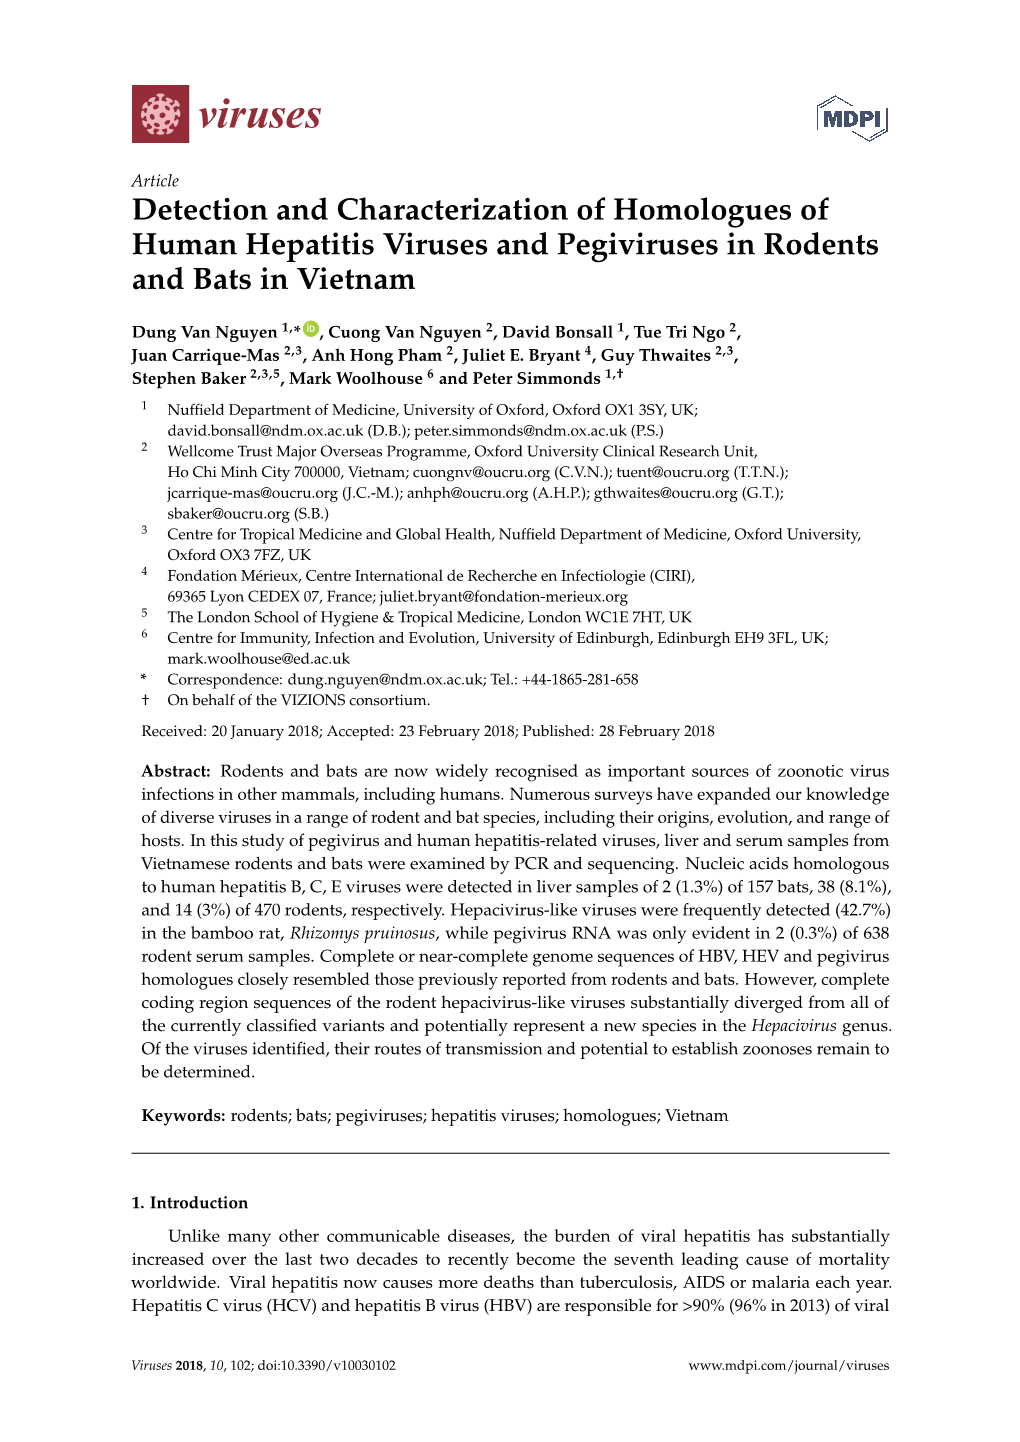 Detection and Characterization of Homologues of Human Hepatitis Viruses and Pegiviruses in Rodents and Bats in Vietnam